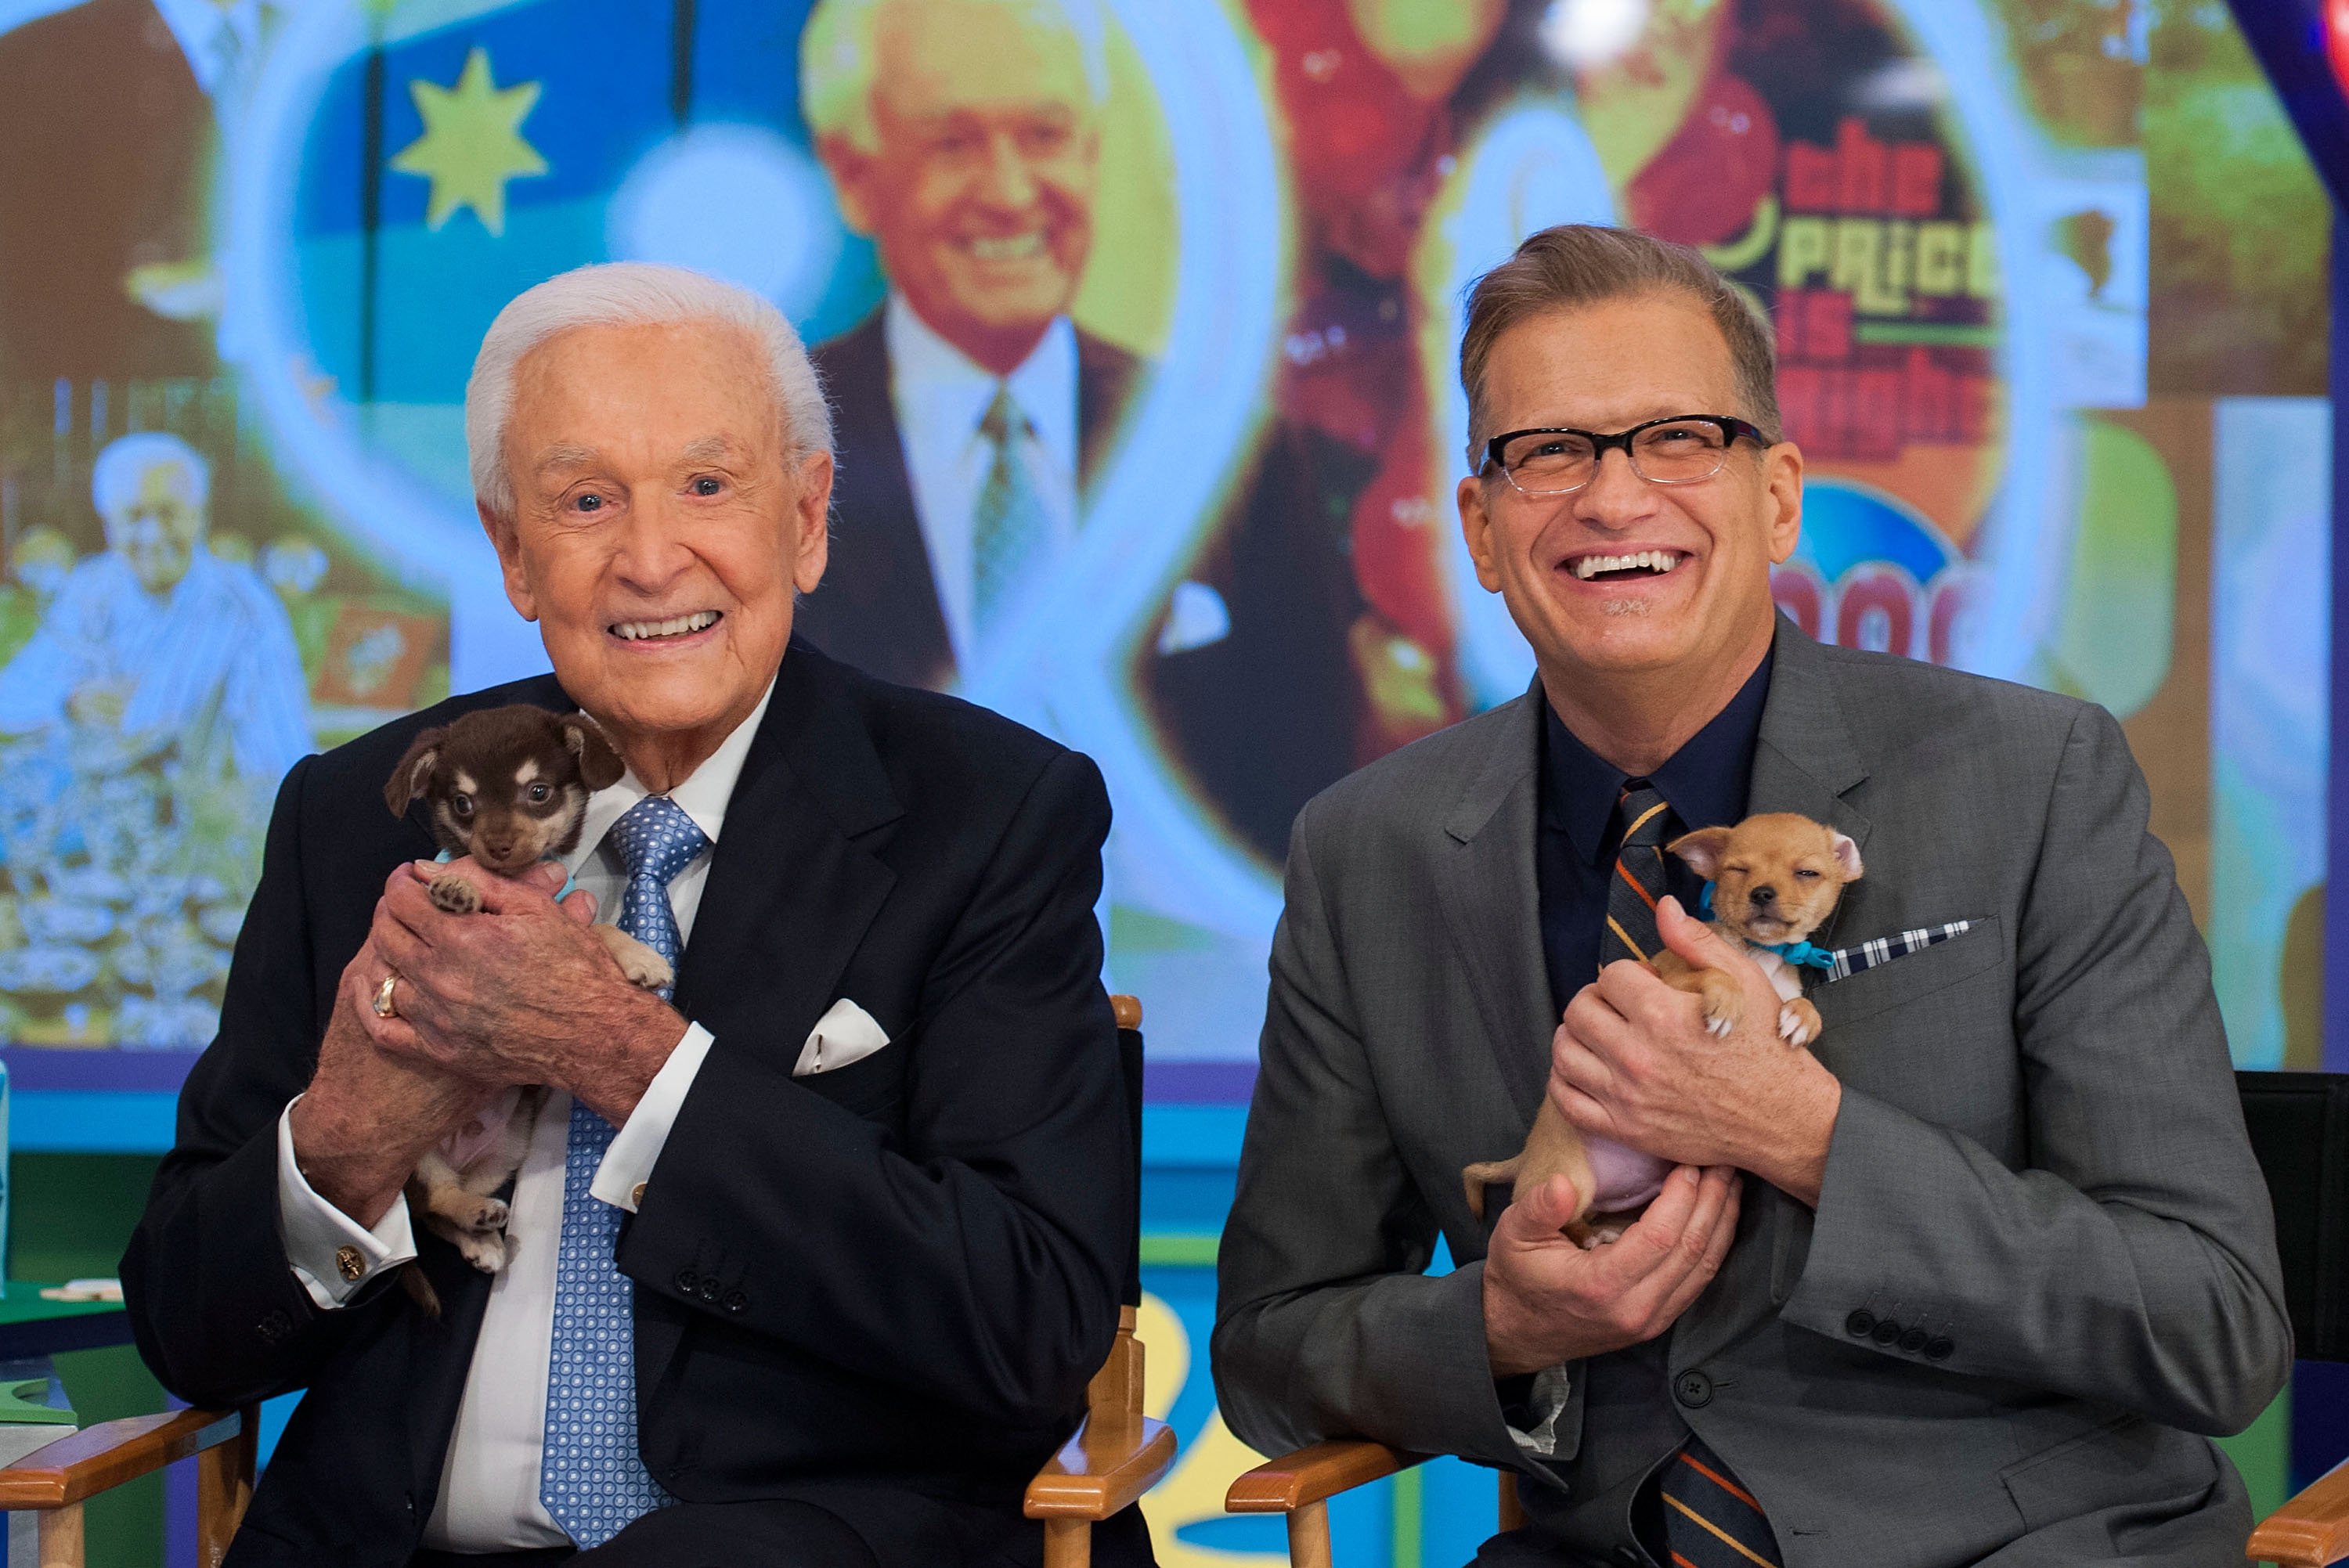  Bob Barker and Drew Carey at CBS' "The Price Is Right" Celebrates Bob Barker's 90th Birthday on November 5, 2013 | Photo: GettyImages